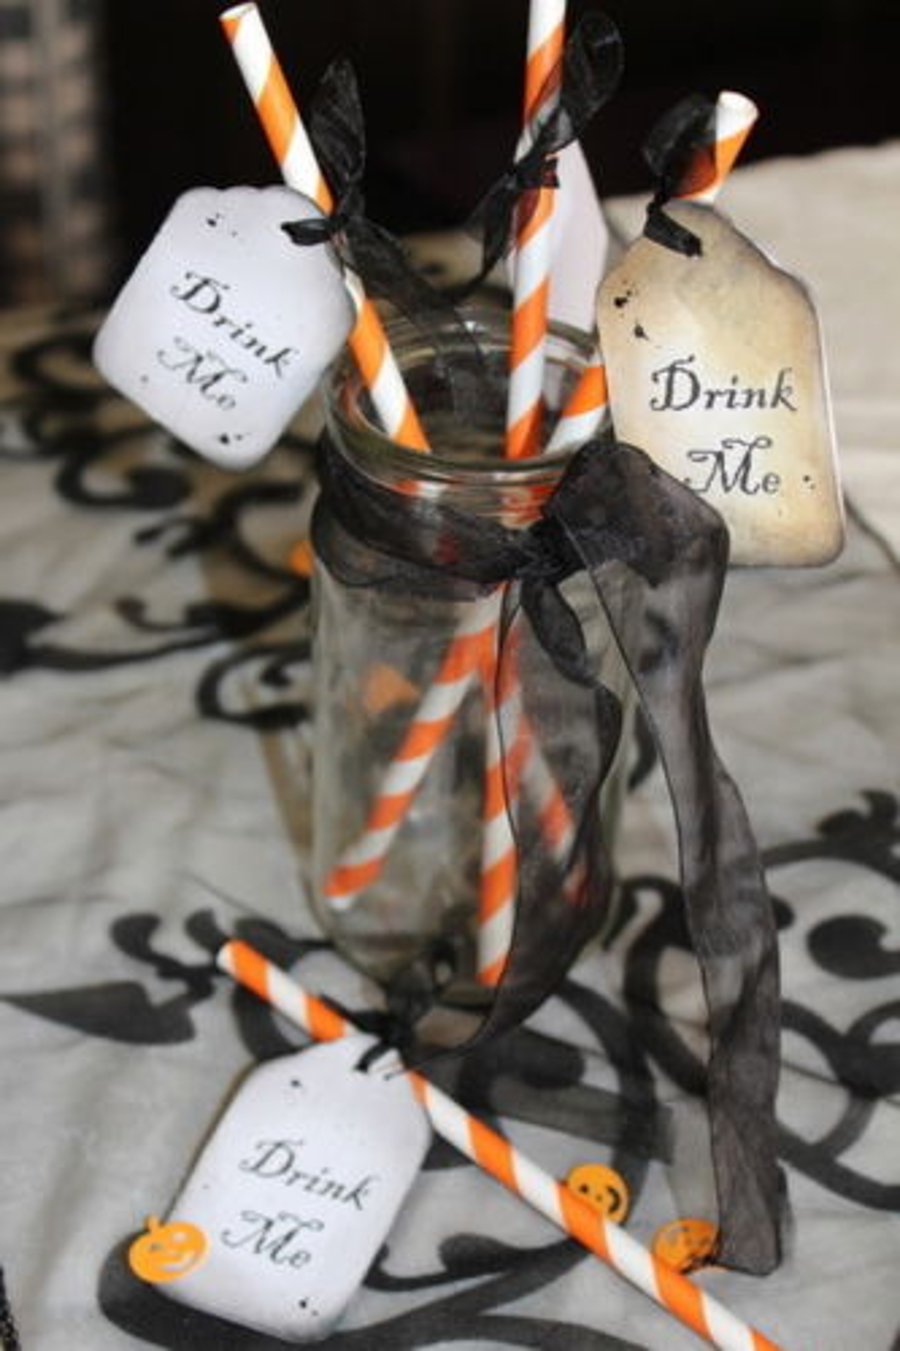 Halloween Paper Straws With Vintage and White Drink Me Tags x 6